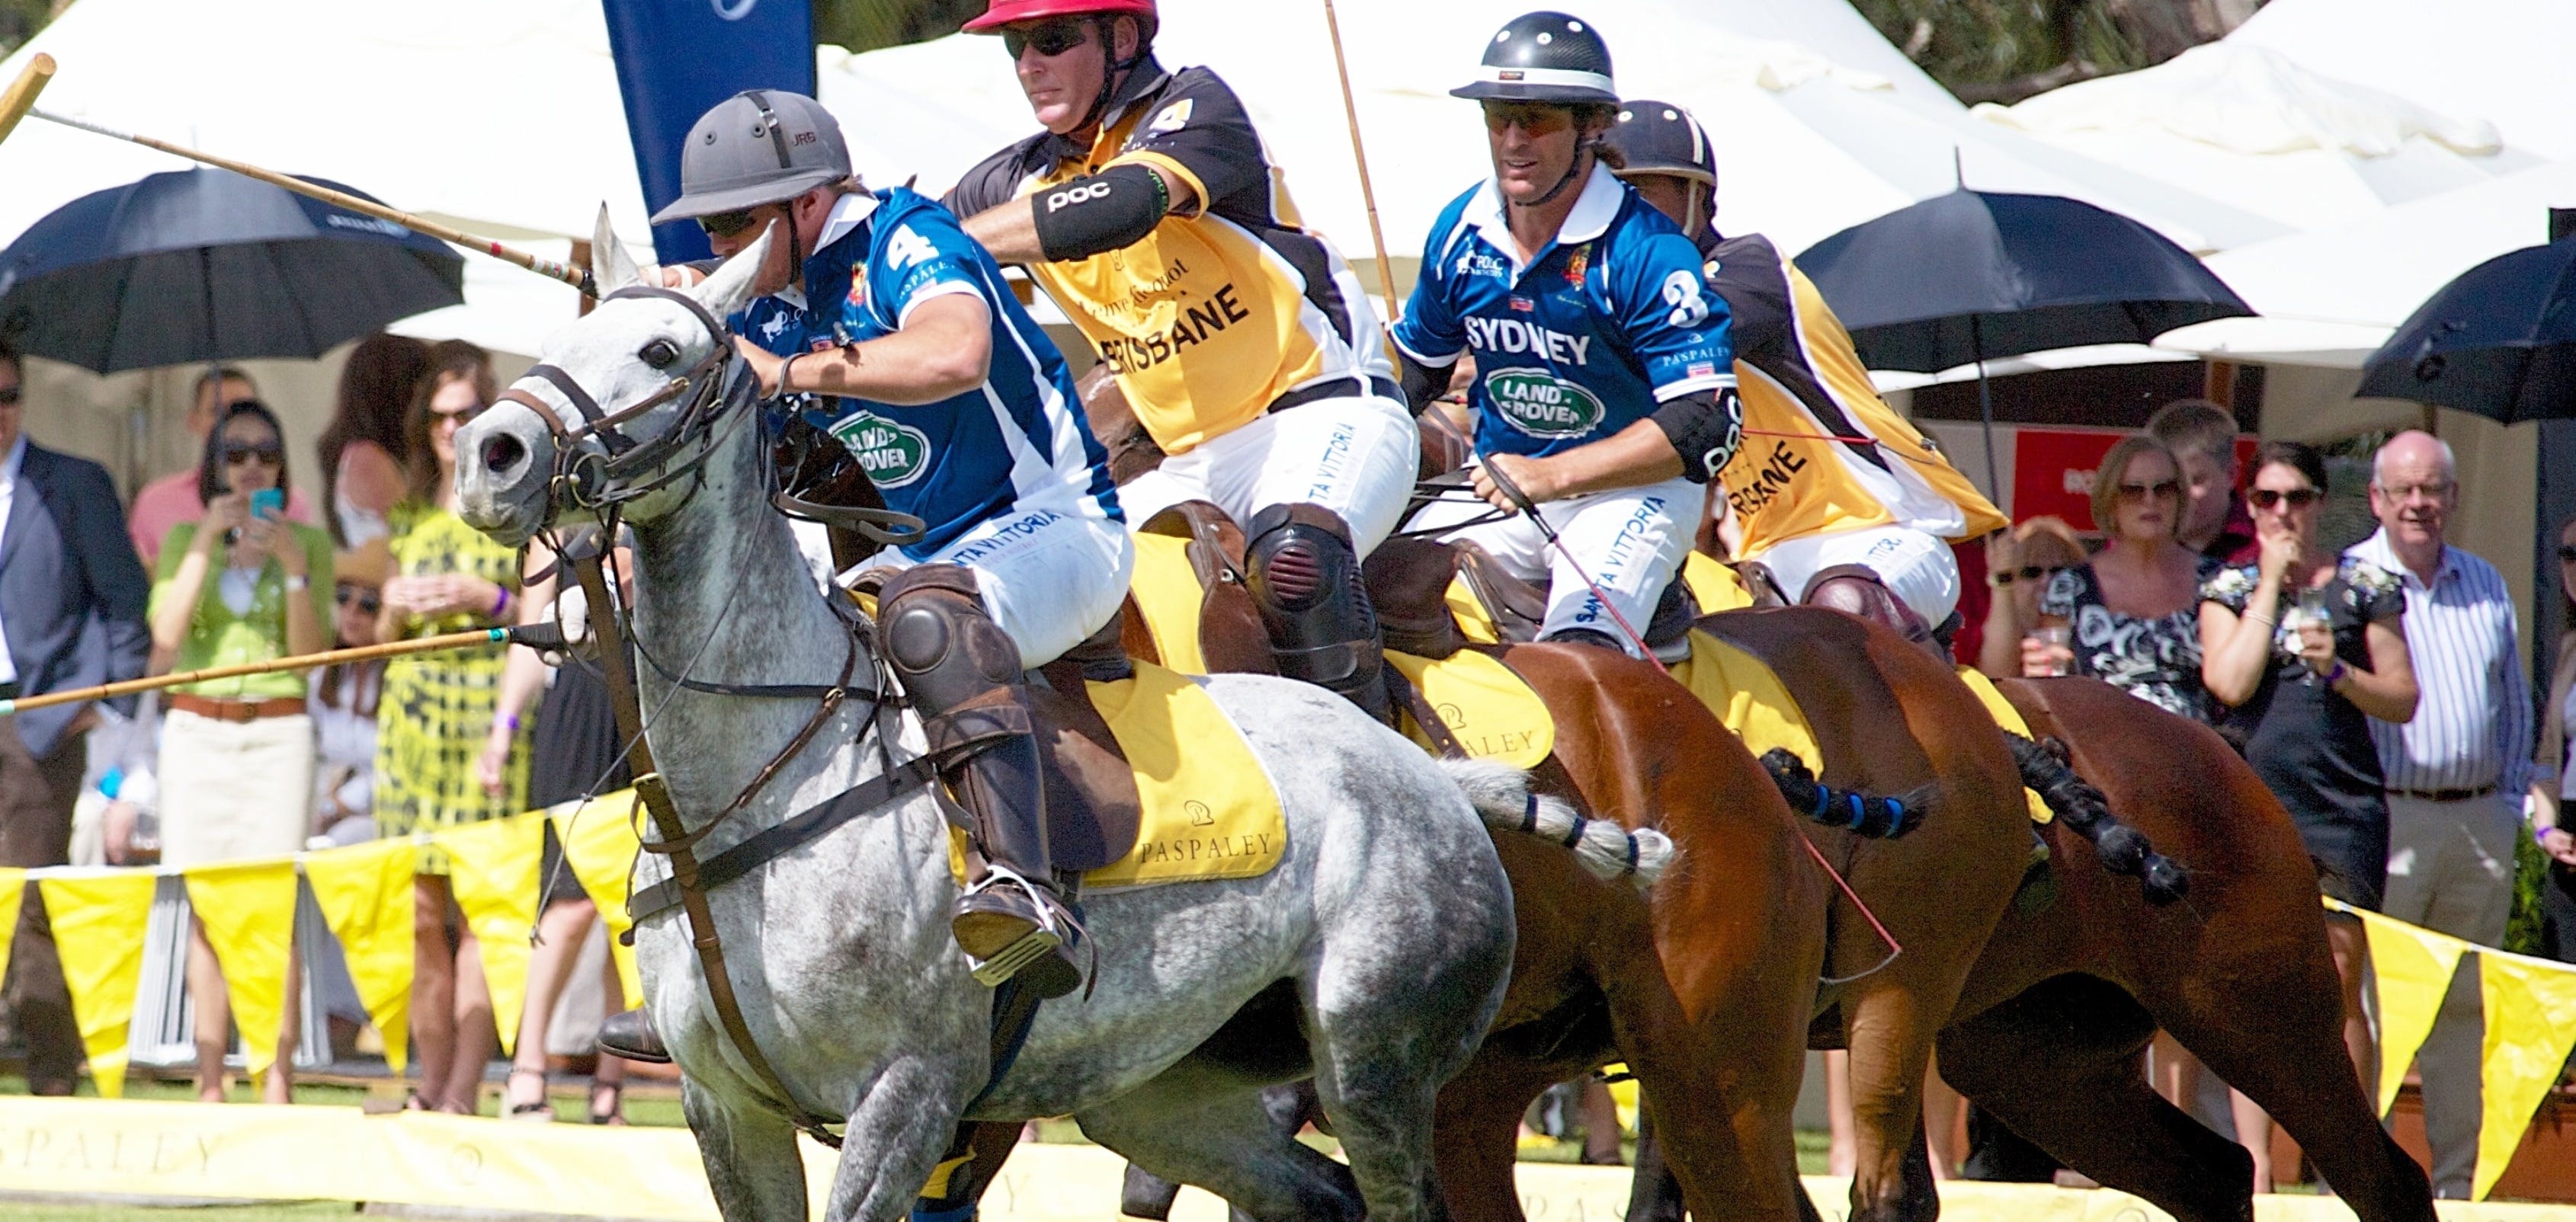 Land Rover Polo in the City Brisbane - Accommodation Brunswick Heads